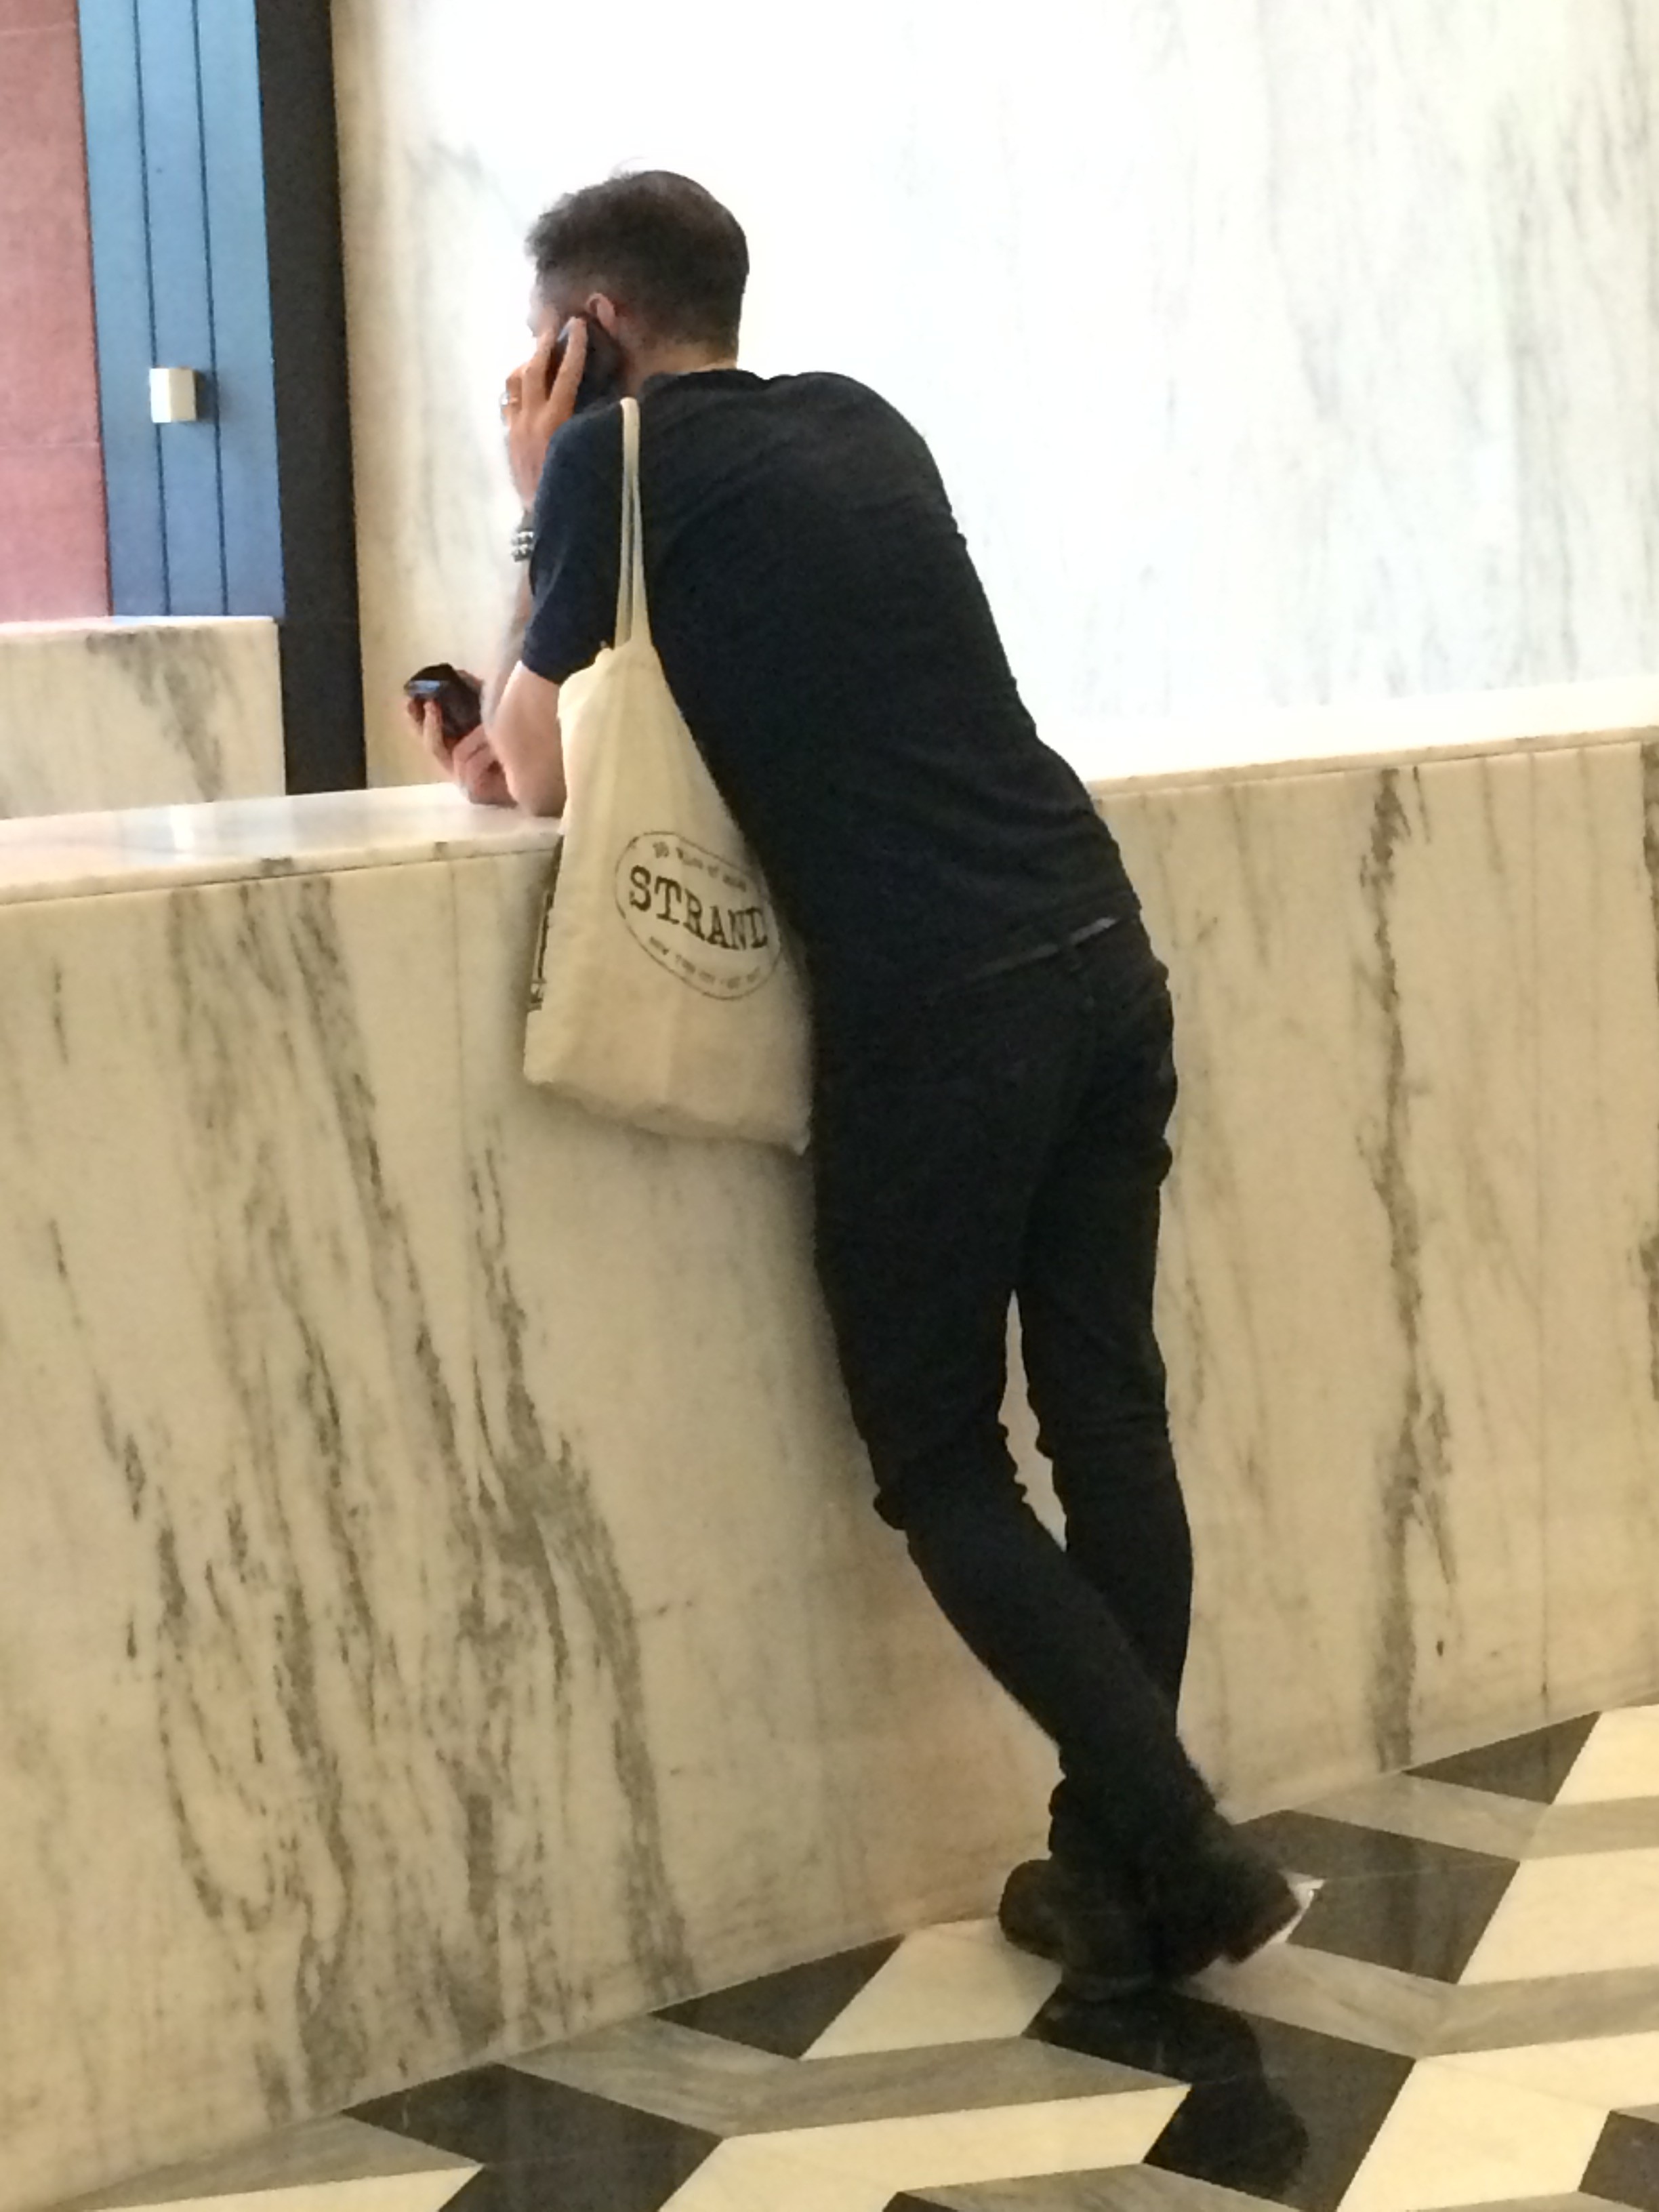 Pictures of People on Their Phones at Bobst Library